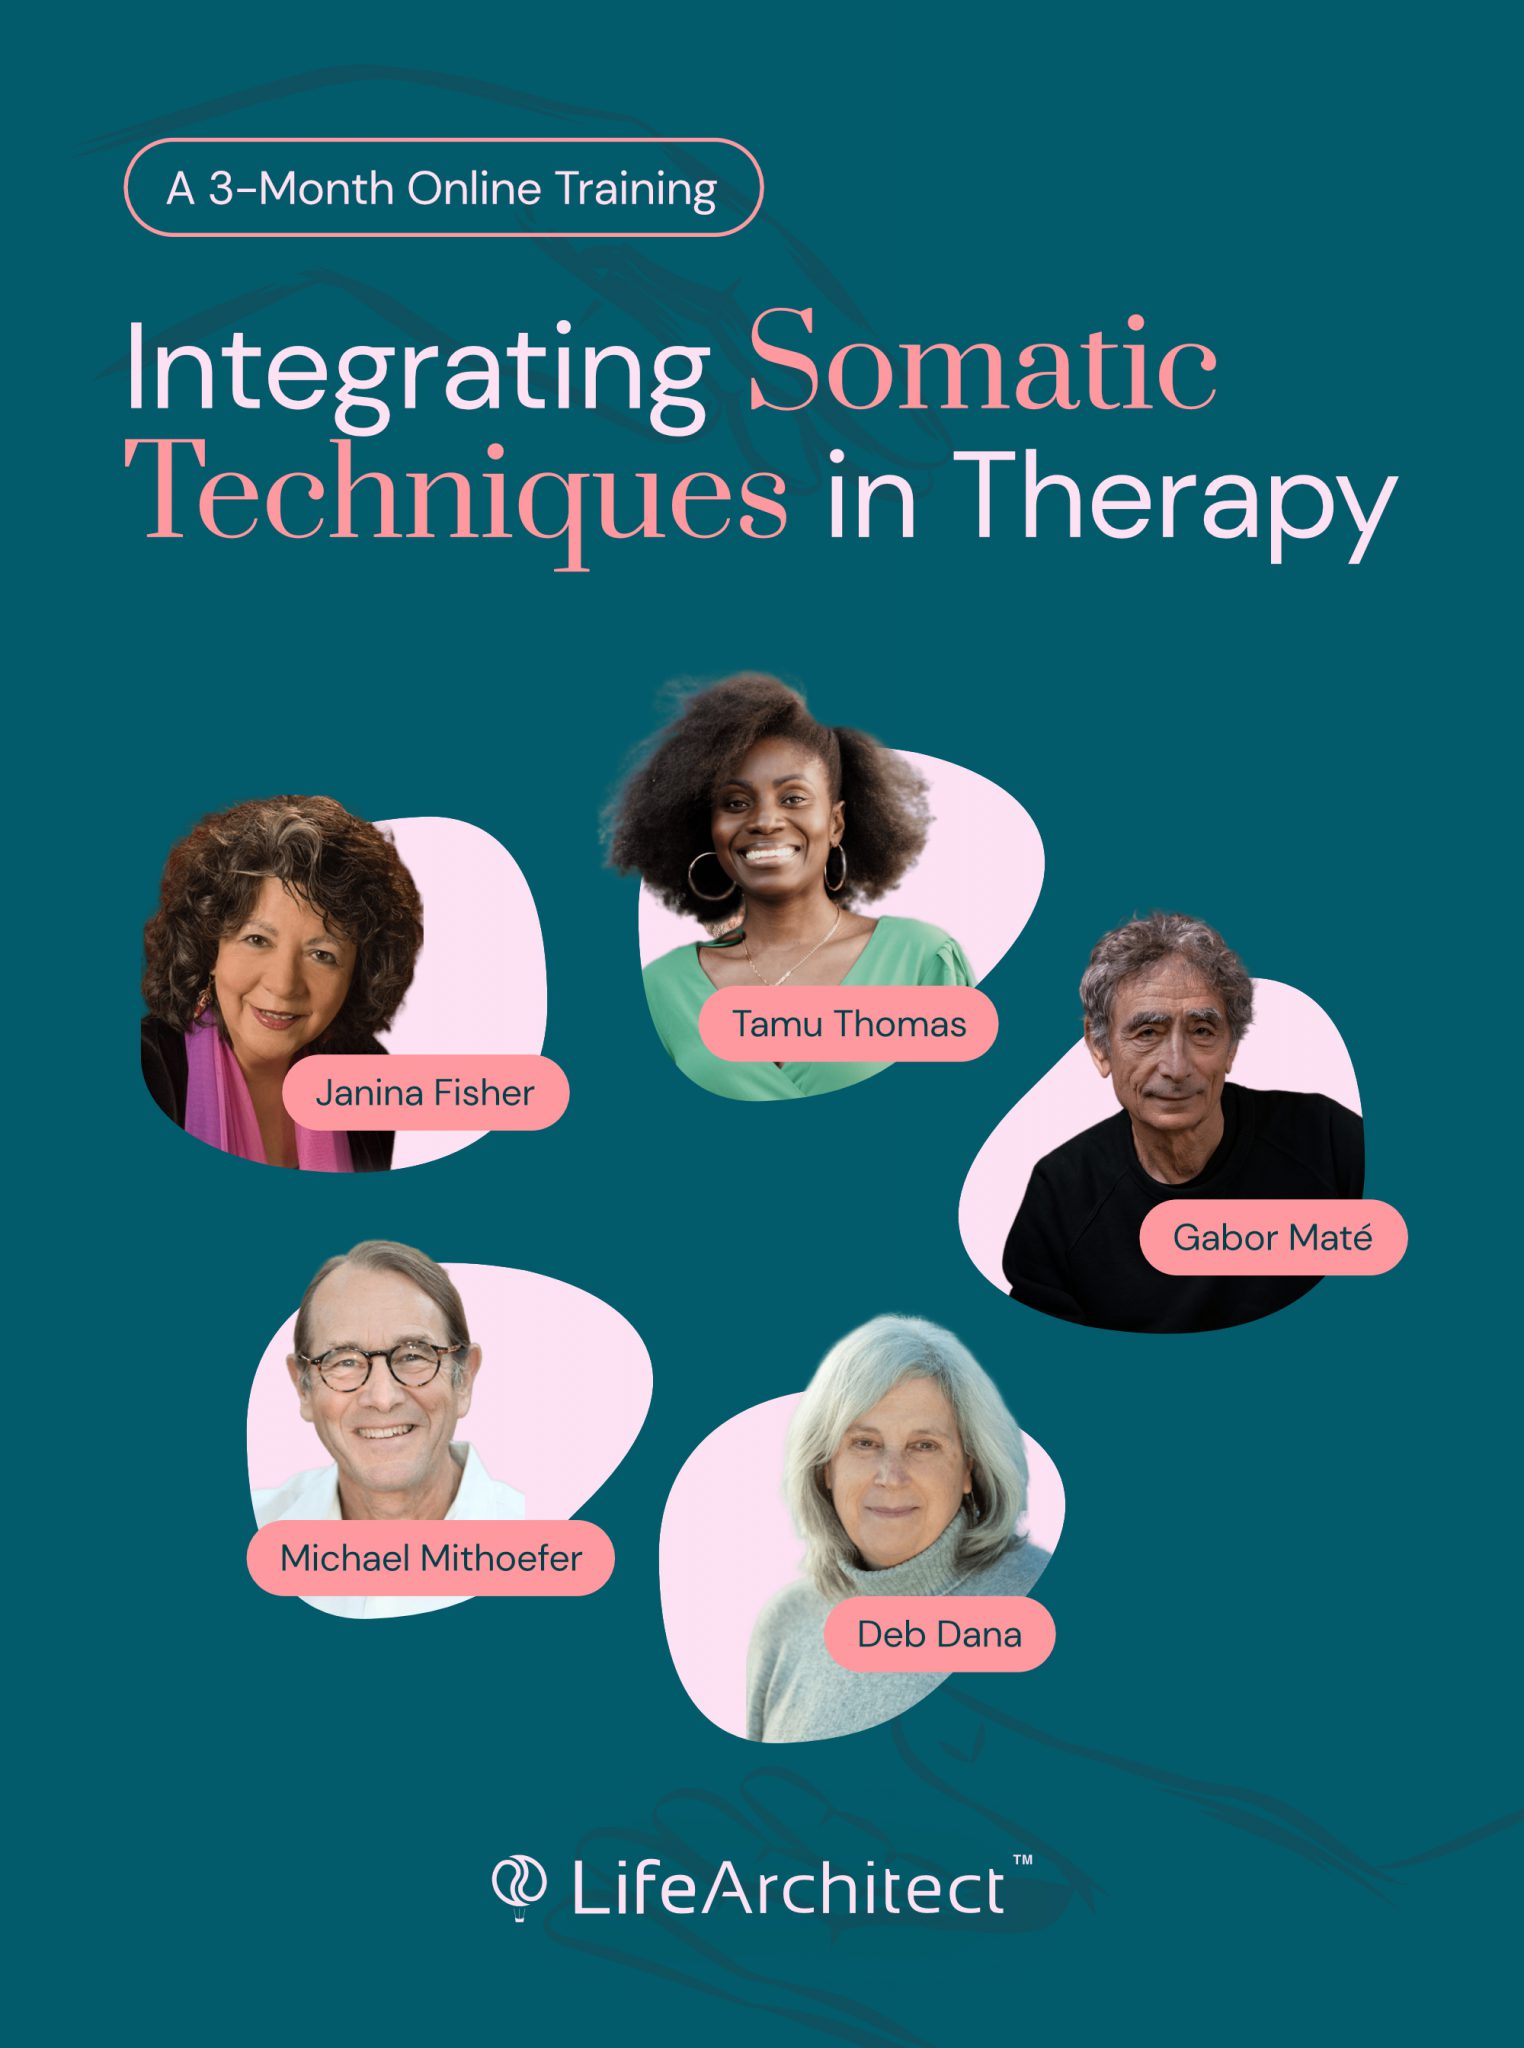 Integrating Somatic Techniques in Therapy